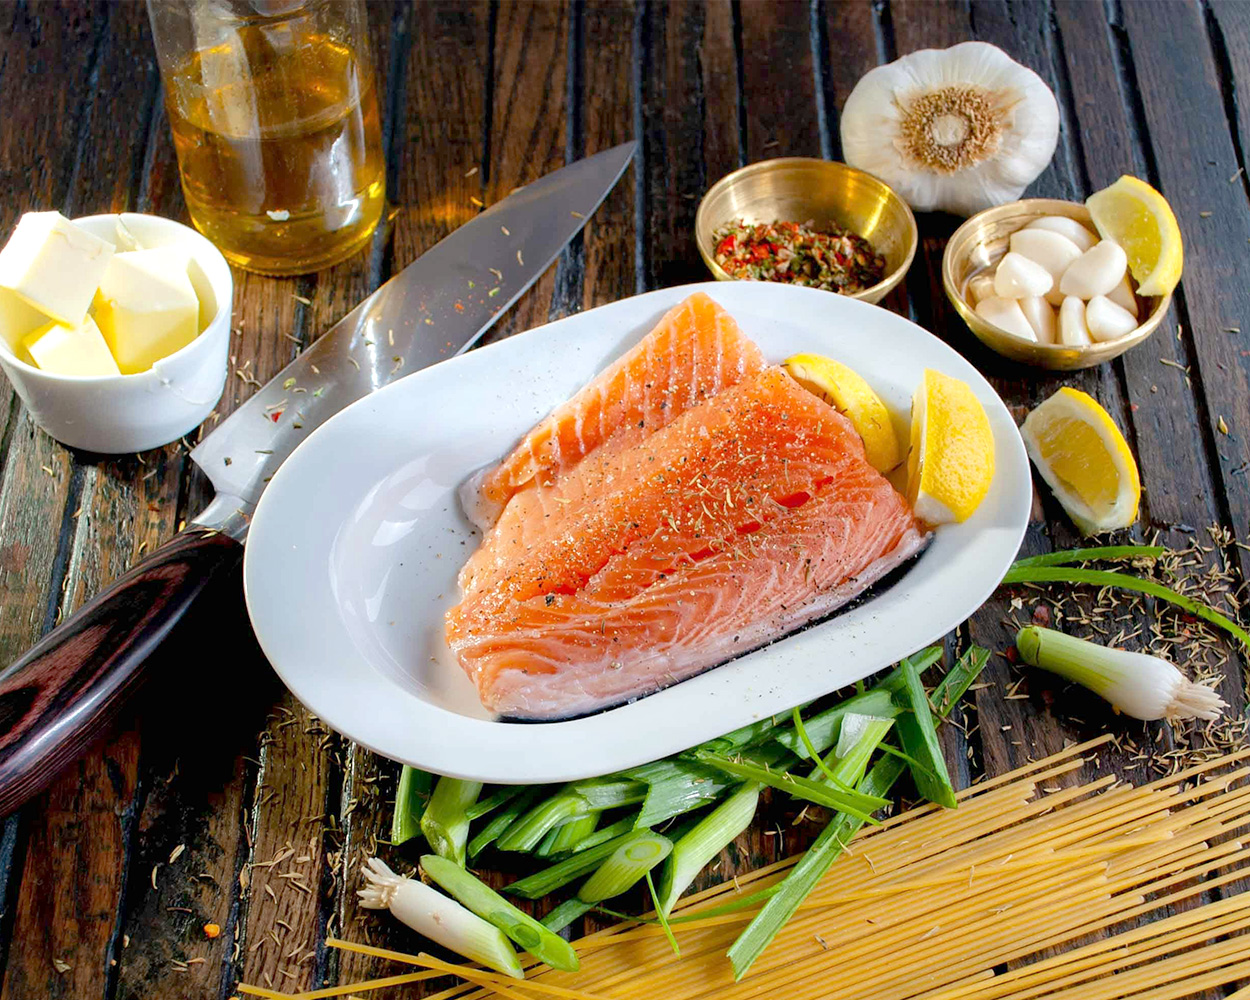 Food display of raw salmon filets and lemons on plate, garlic, cubed butter, seasonings, and various ingredients on a table.